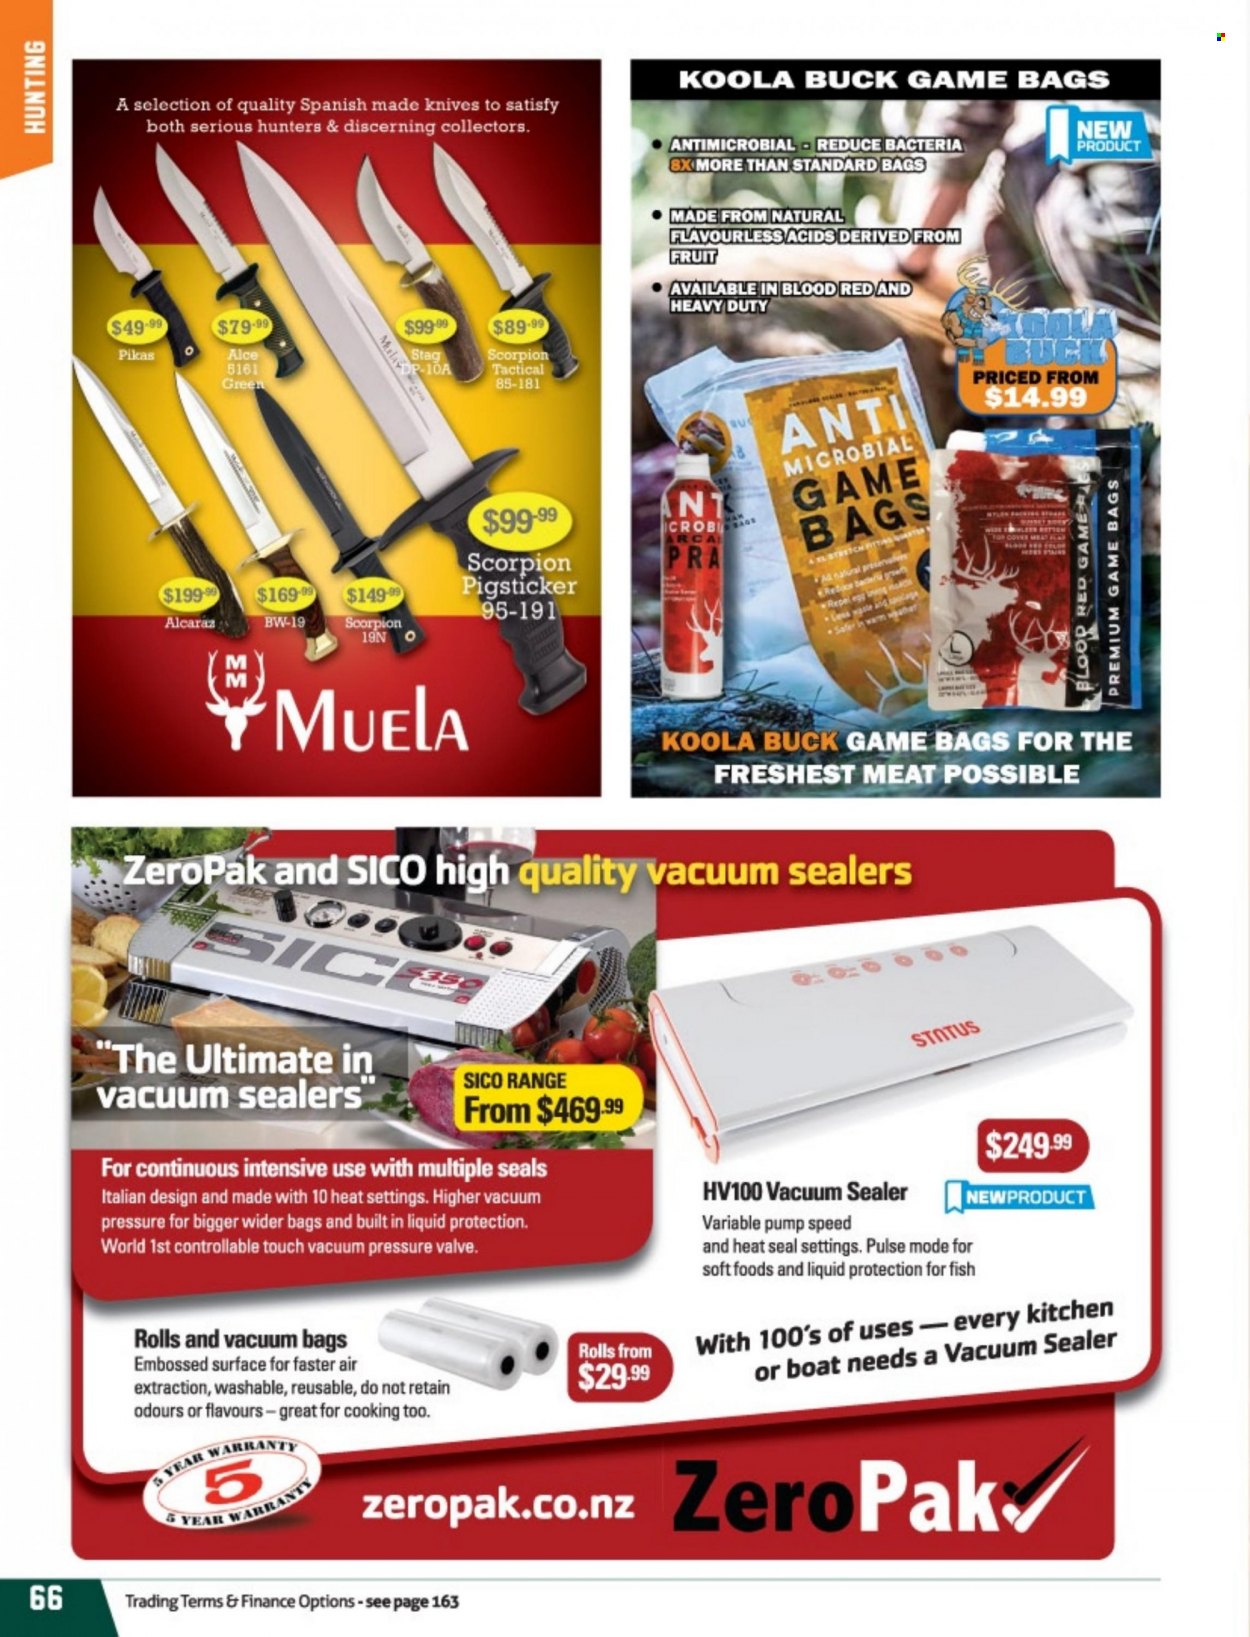 thumbnail - Hunting & Fishing mailer - Sales products - knife. Page 66.